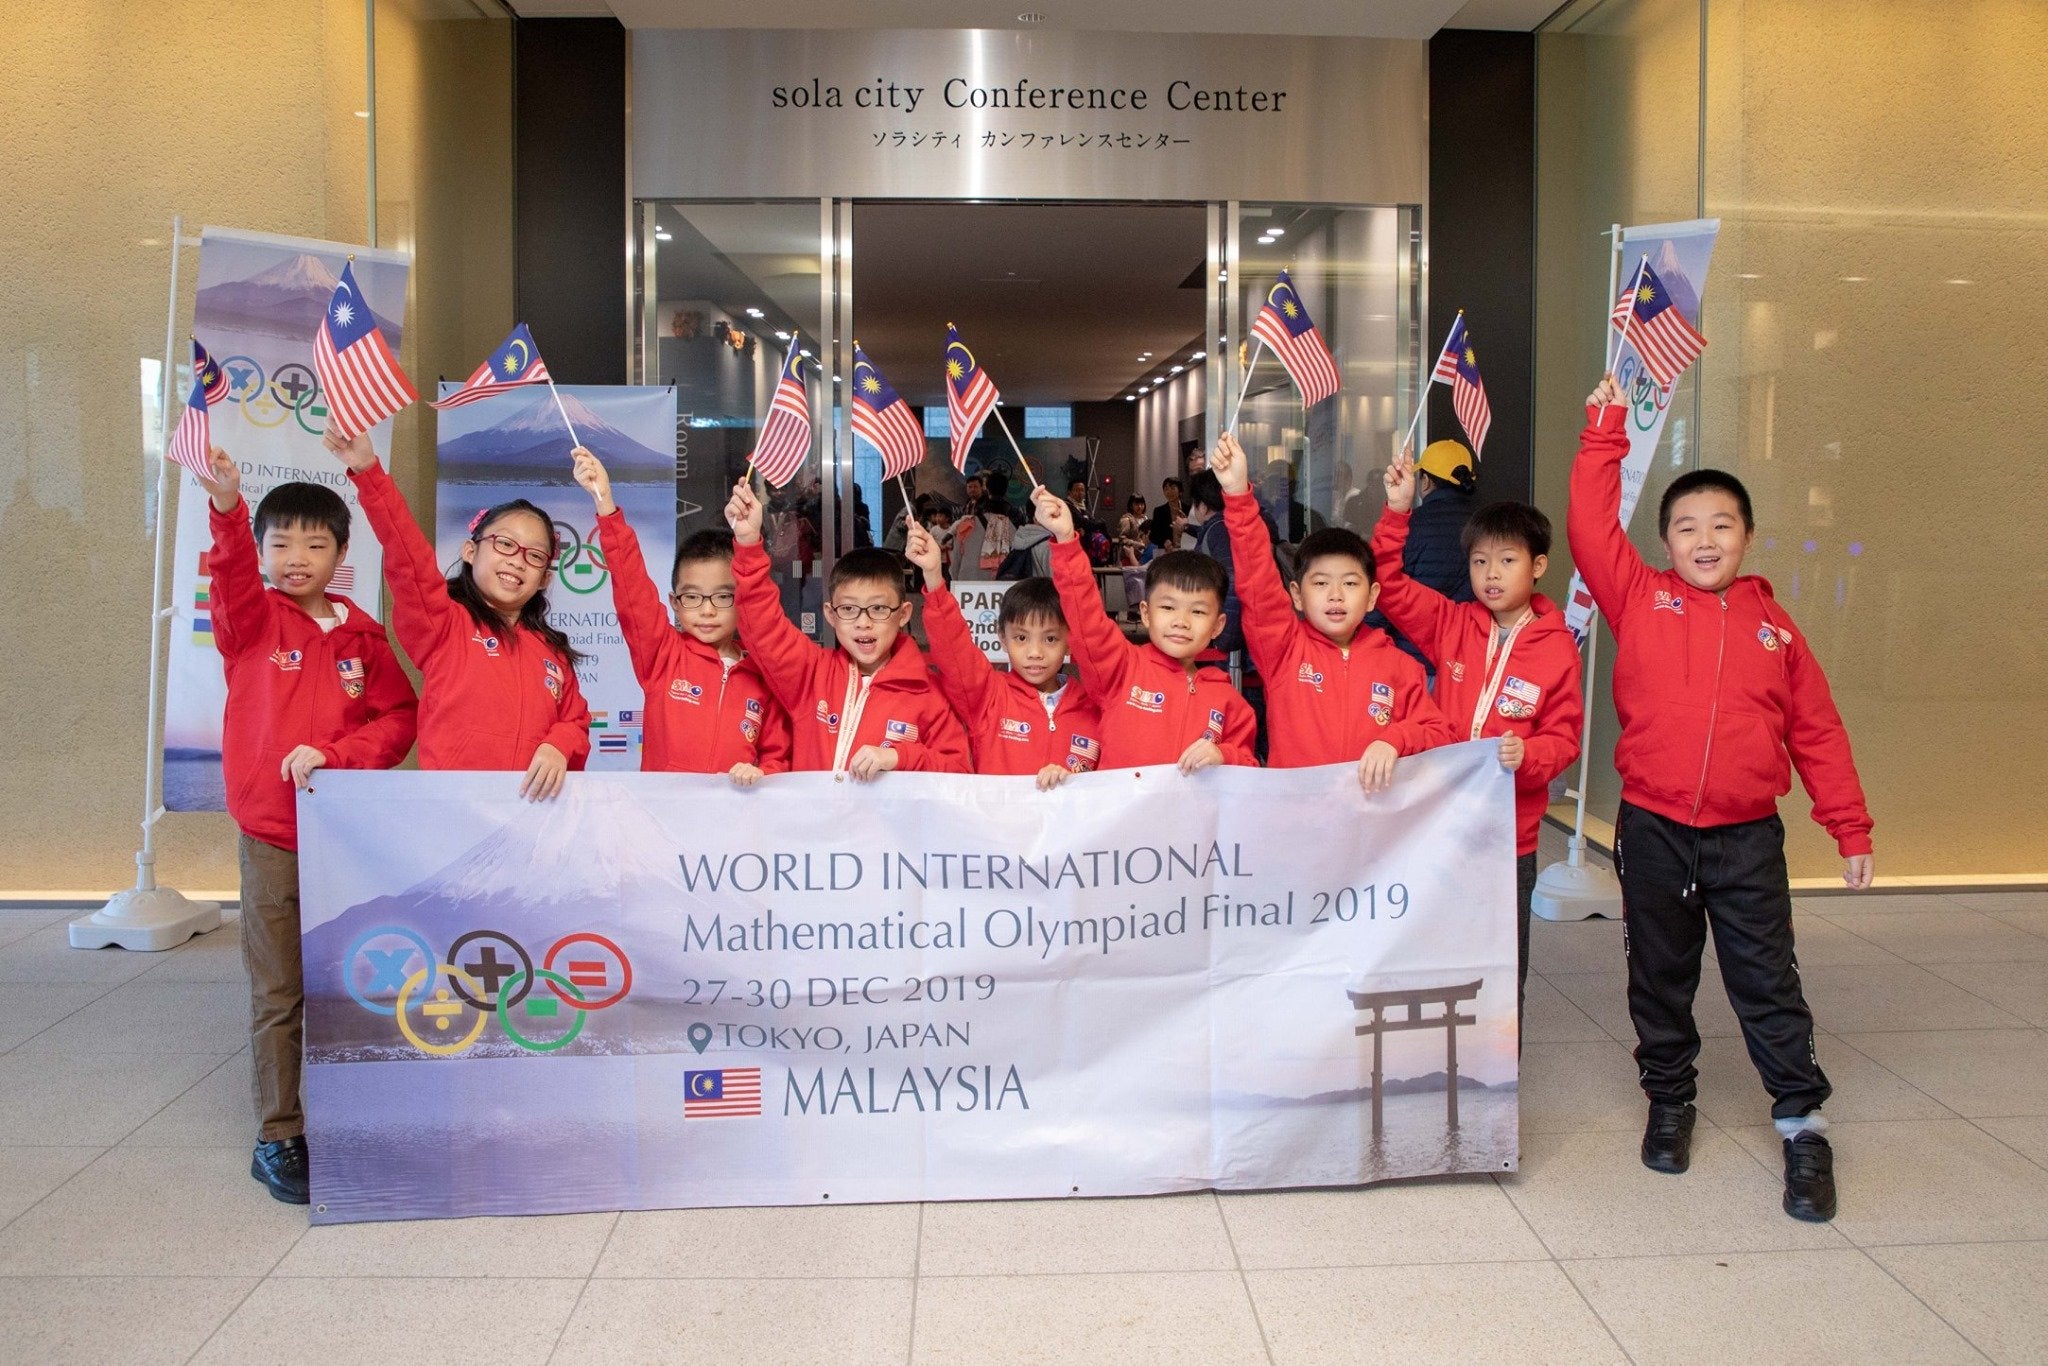 M'sian Primary School Math Geniuses Bag 9 Medals At World Championship In Japan - WORLD OF BUZZ 2